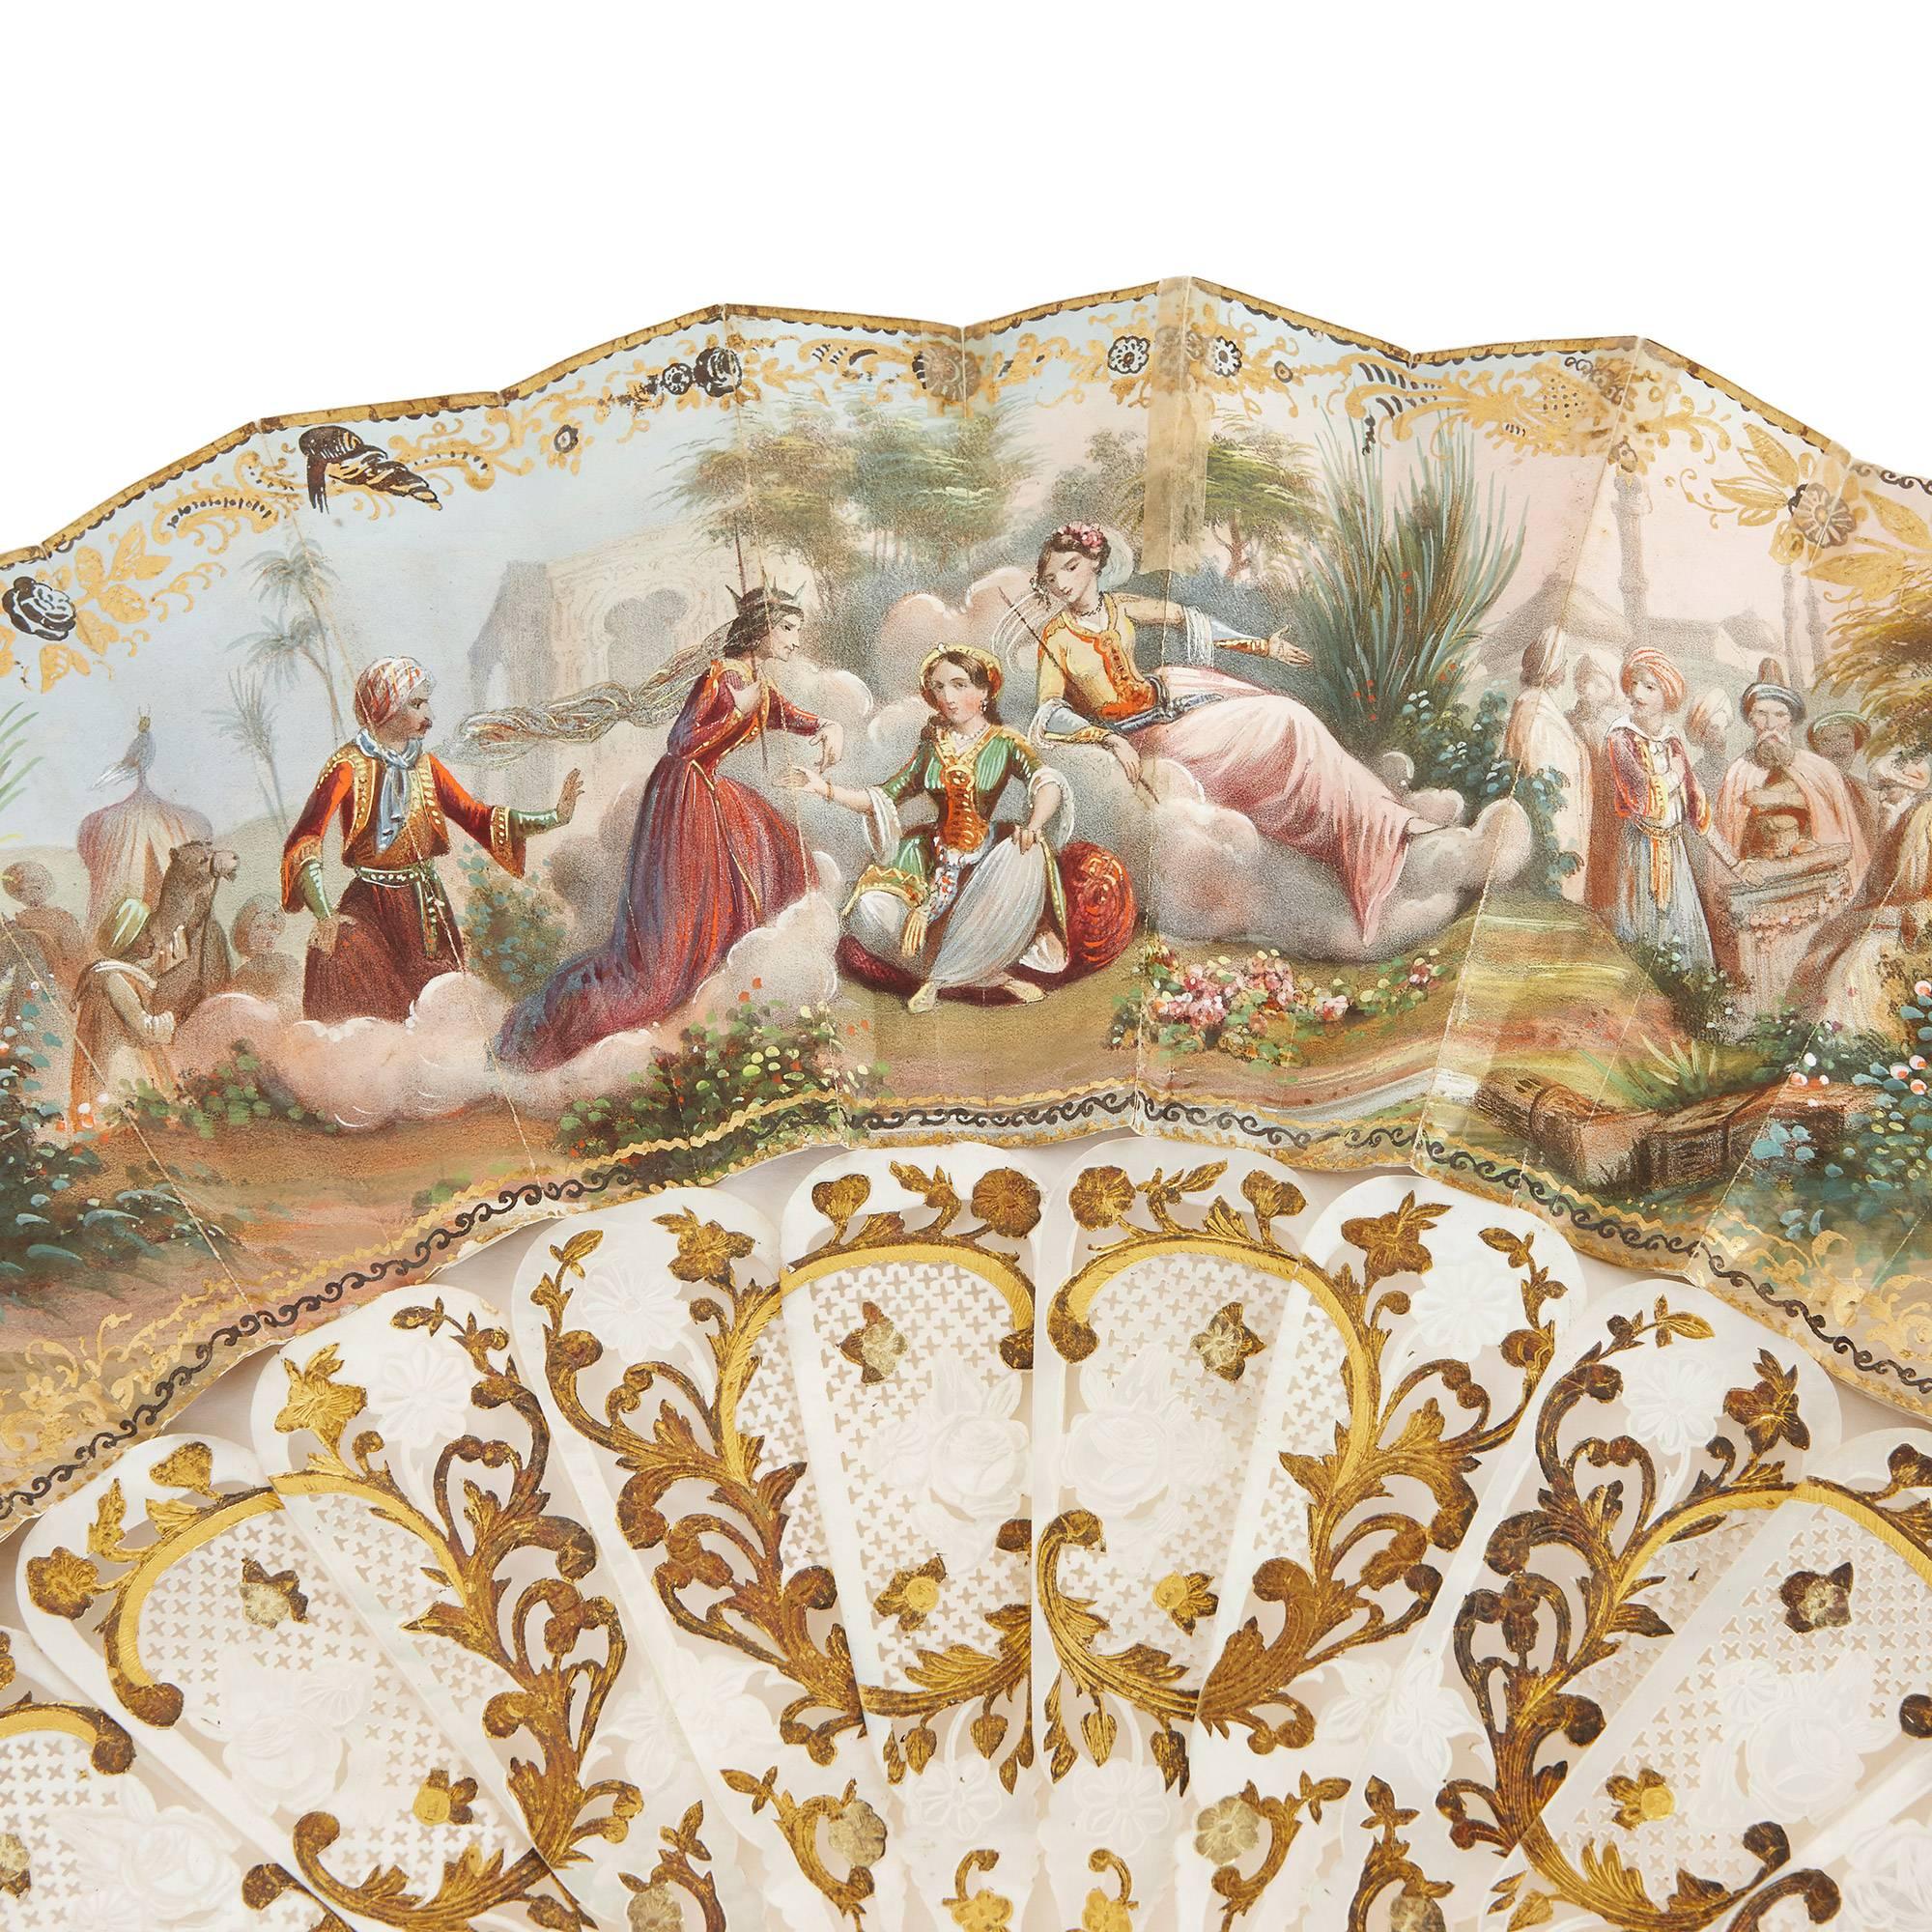 Made for the Turkish market; the mother-of-pearl sticks finely pierced with gold decoration, the paper fan painted with a middle eastern scene with figures, in a gold mounted, silk box.

This exquisite French fan, featuring an exquisitely rendered